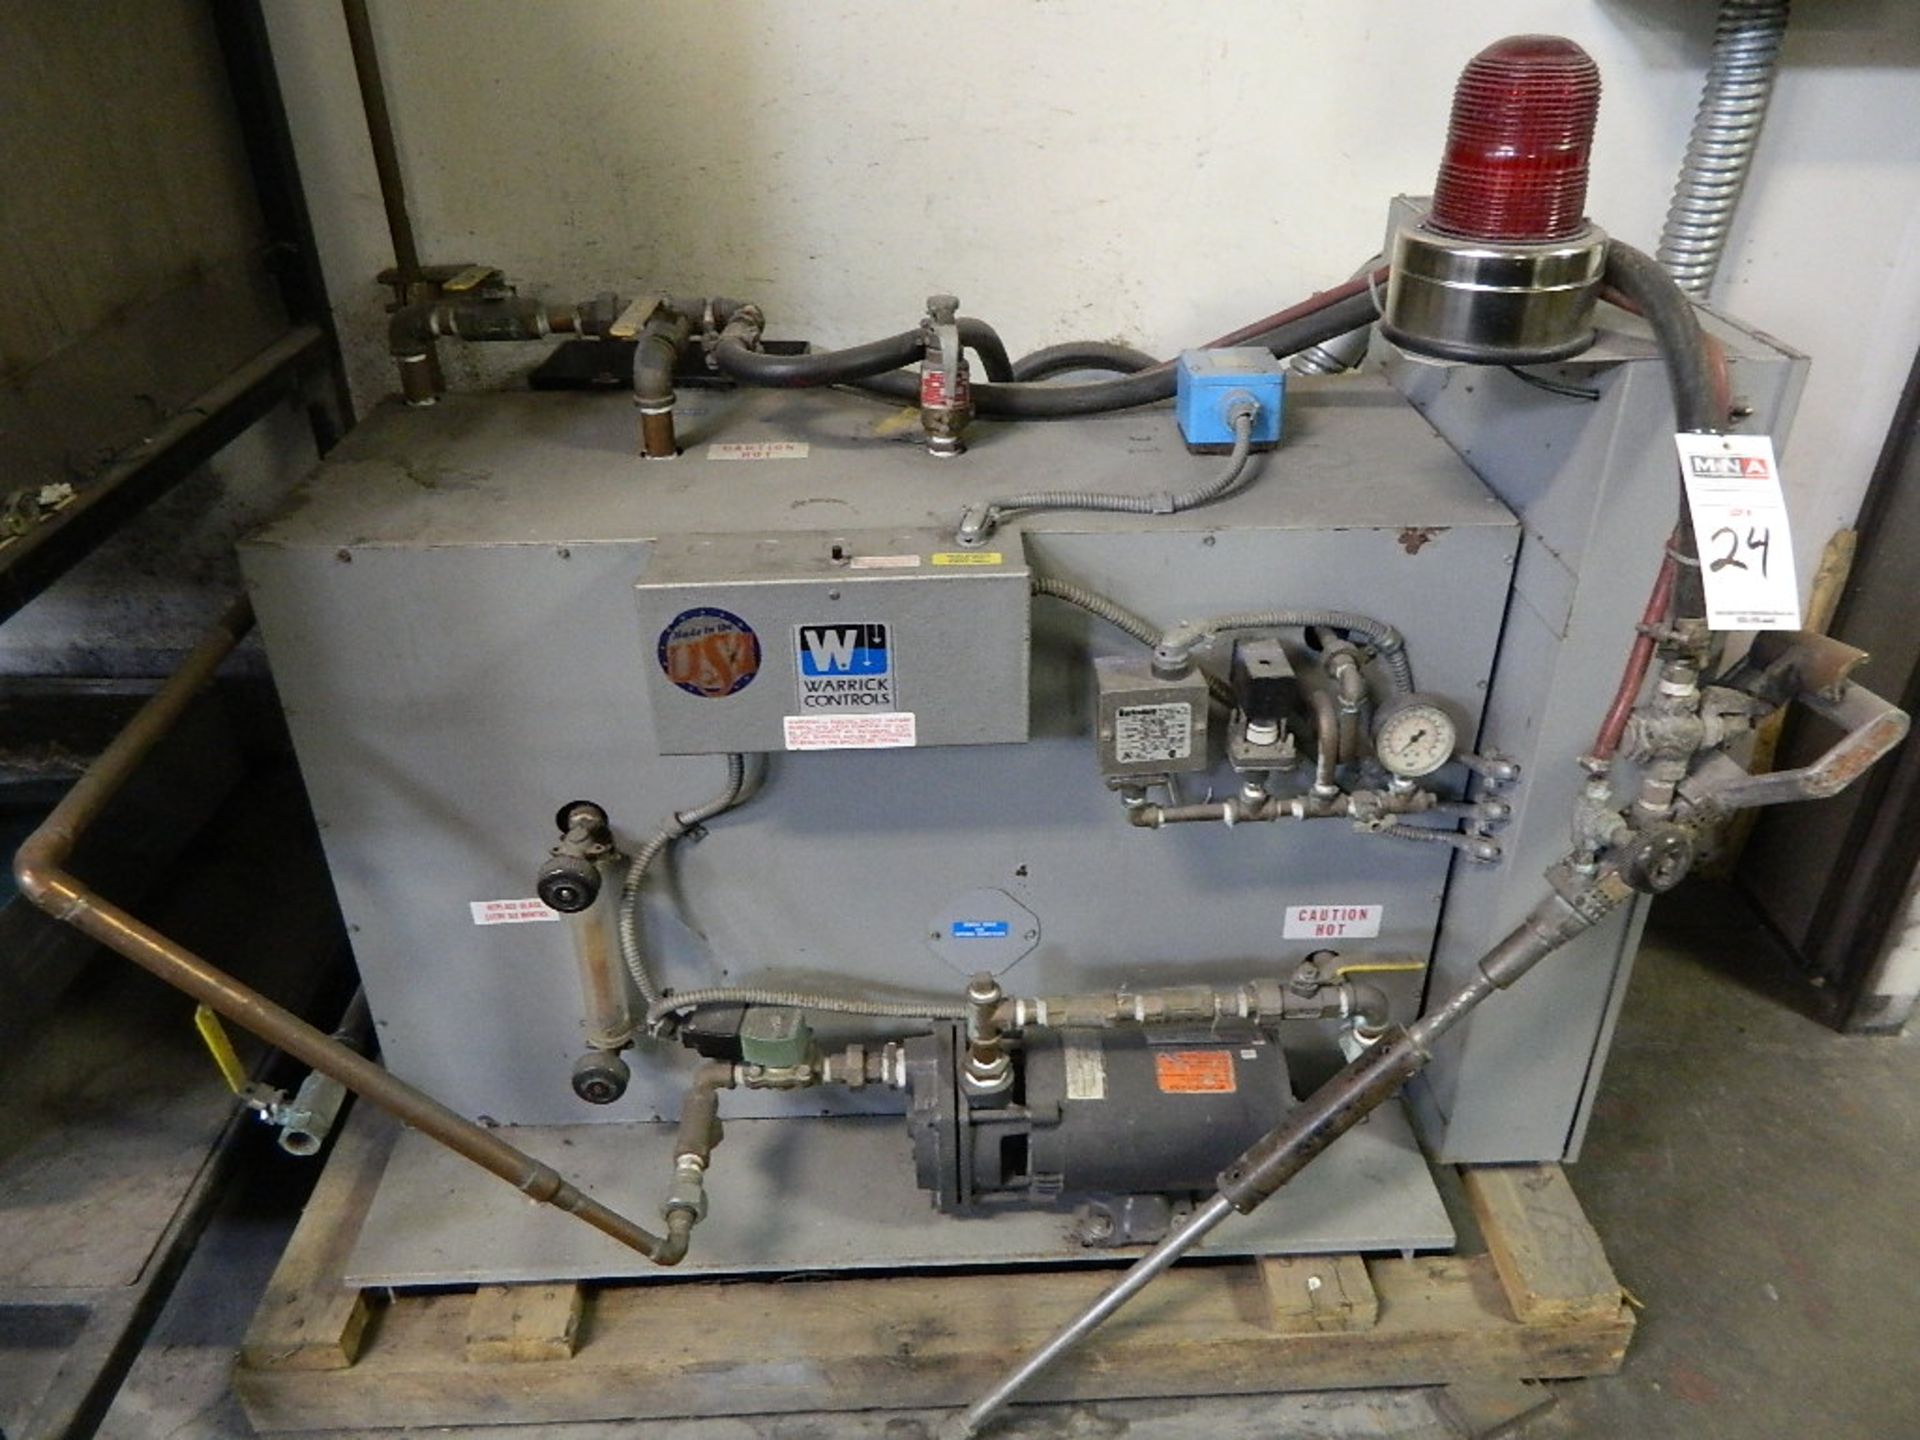 2001 Electro-Steam Generator Mdl LB-60 w 100 max PSI  s/n 35955 - Image 2 of 5